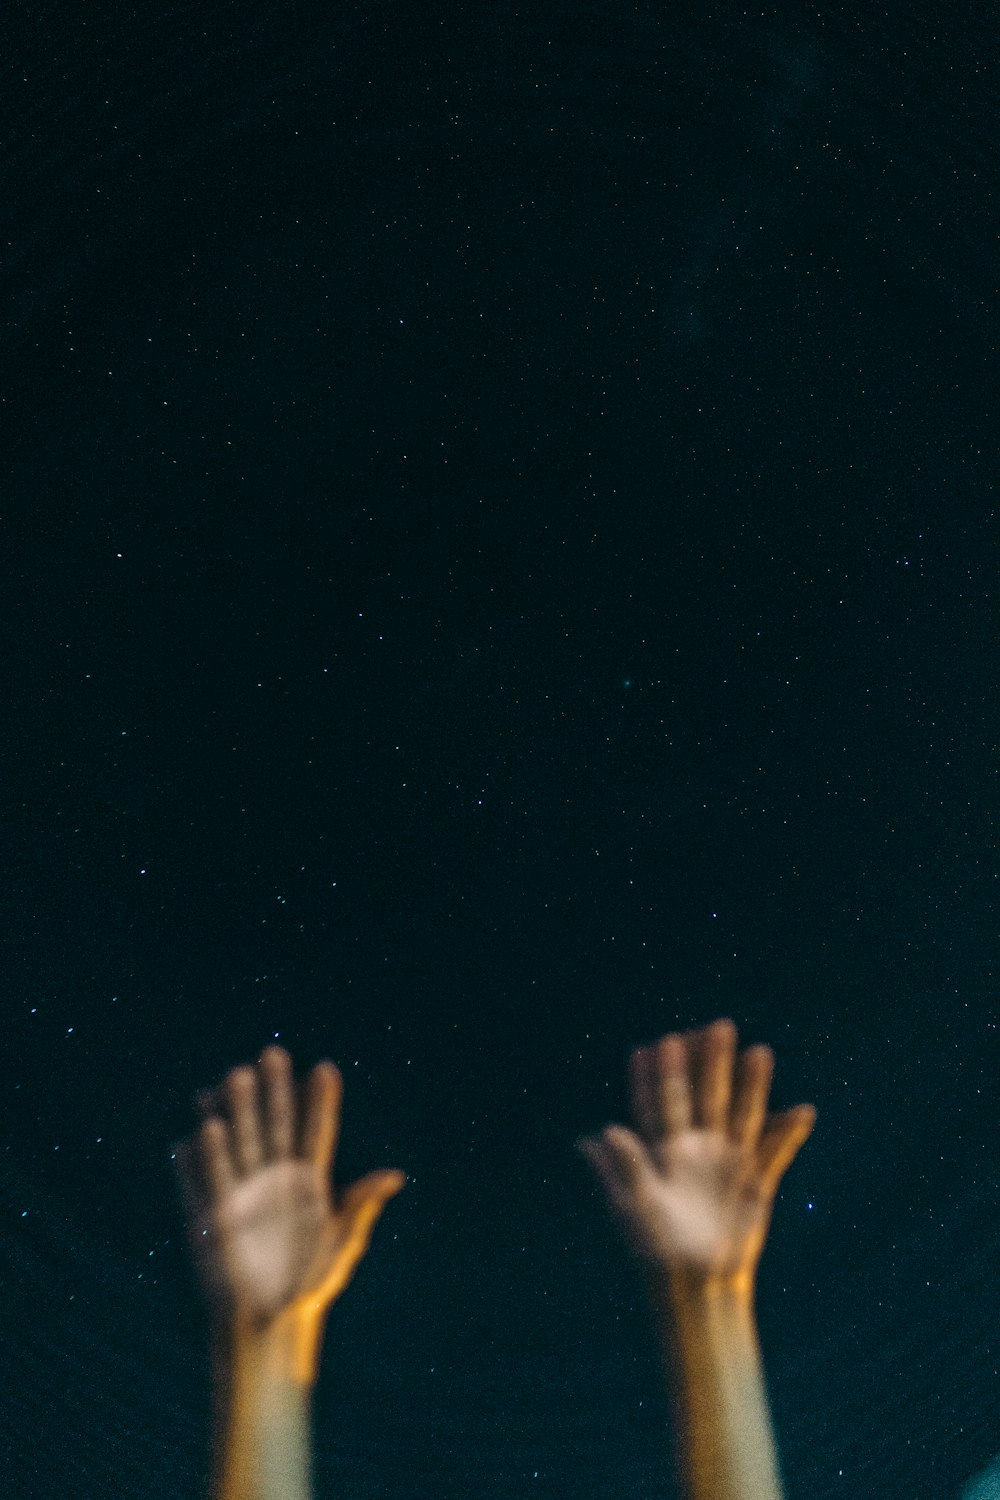 two hands reaching up into the sky at night